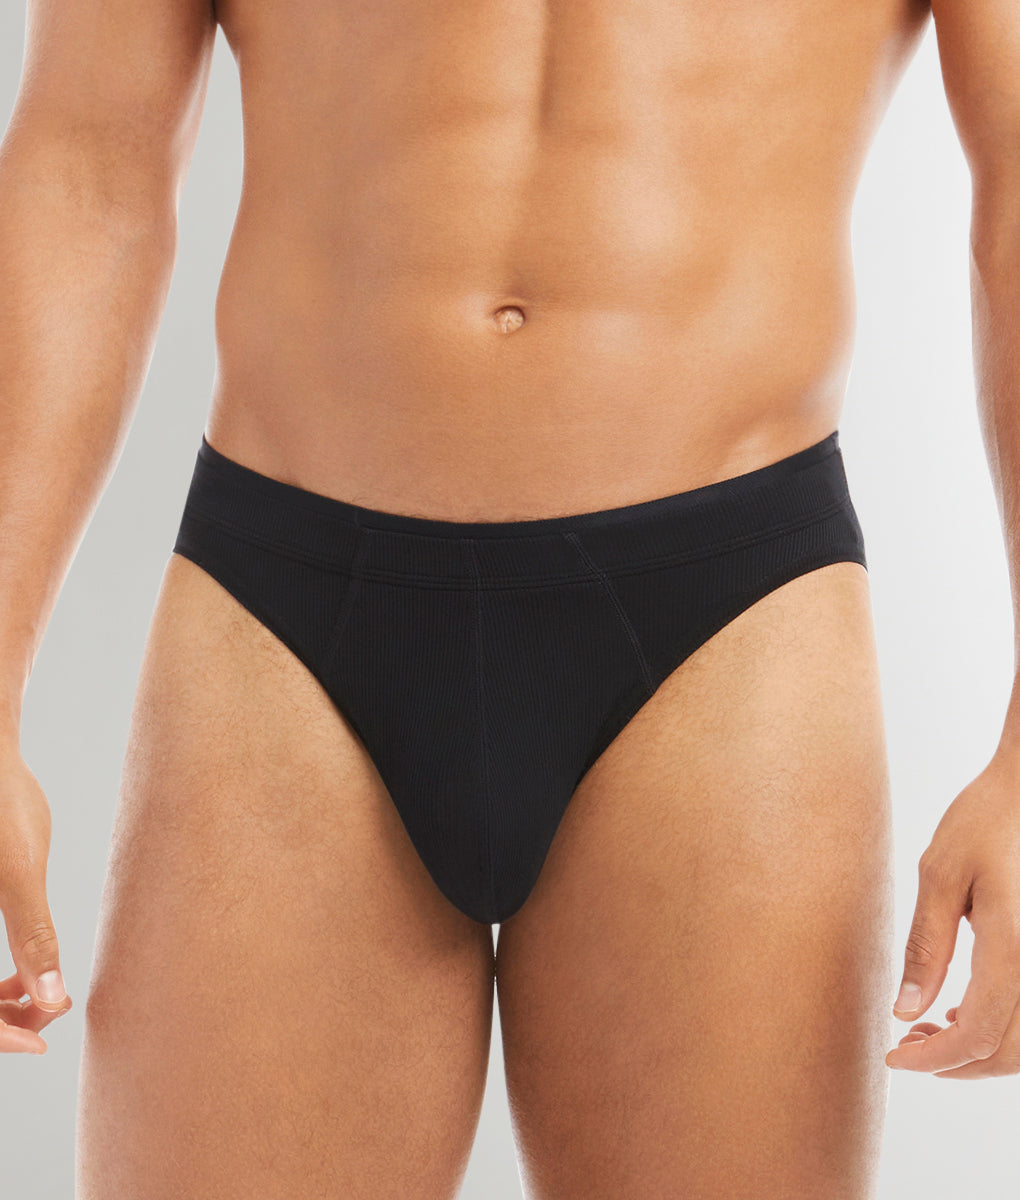 Great Deals On Flexible And Durable Wholesale Mens Underwear